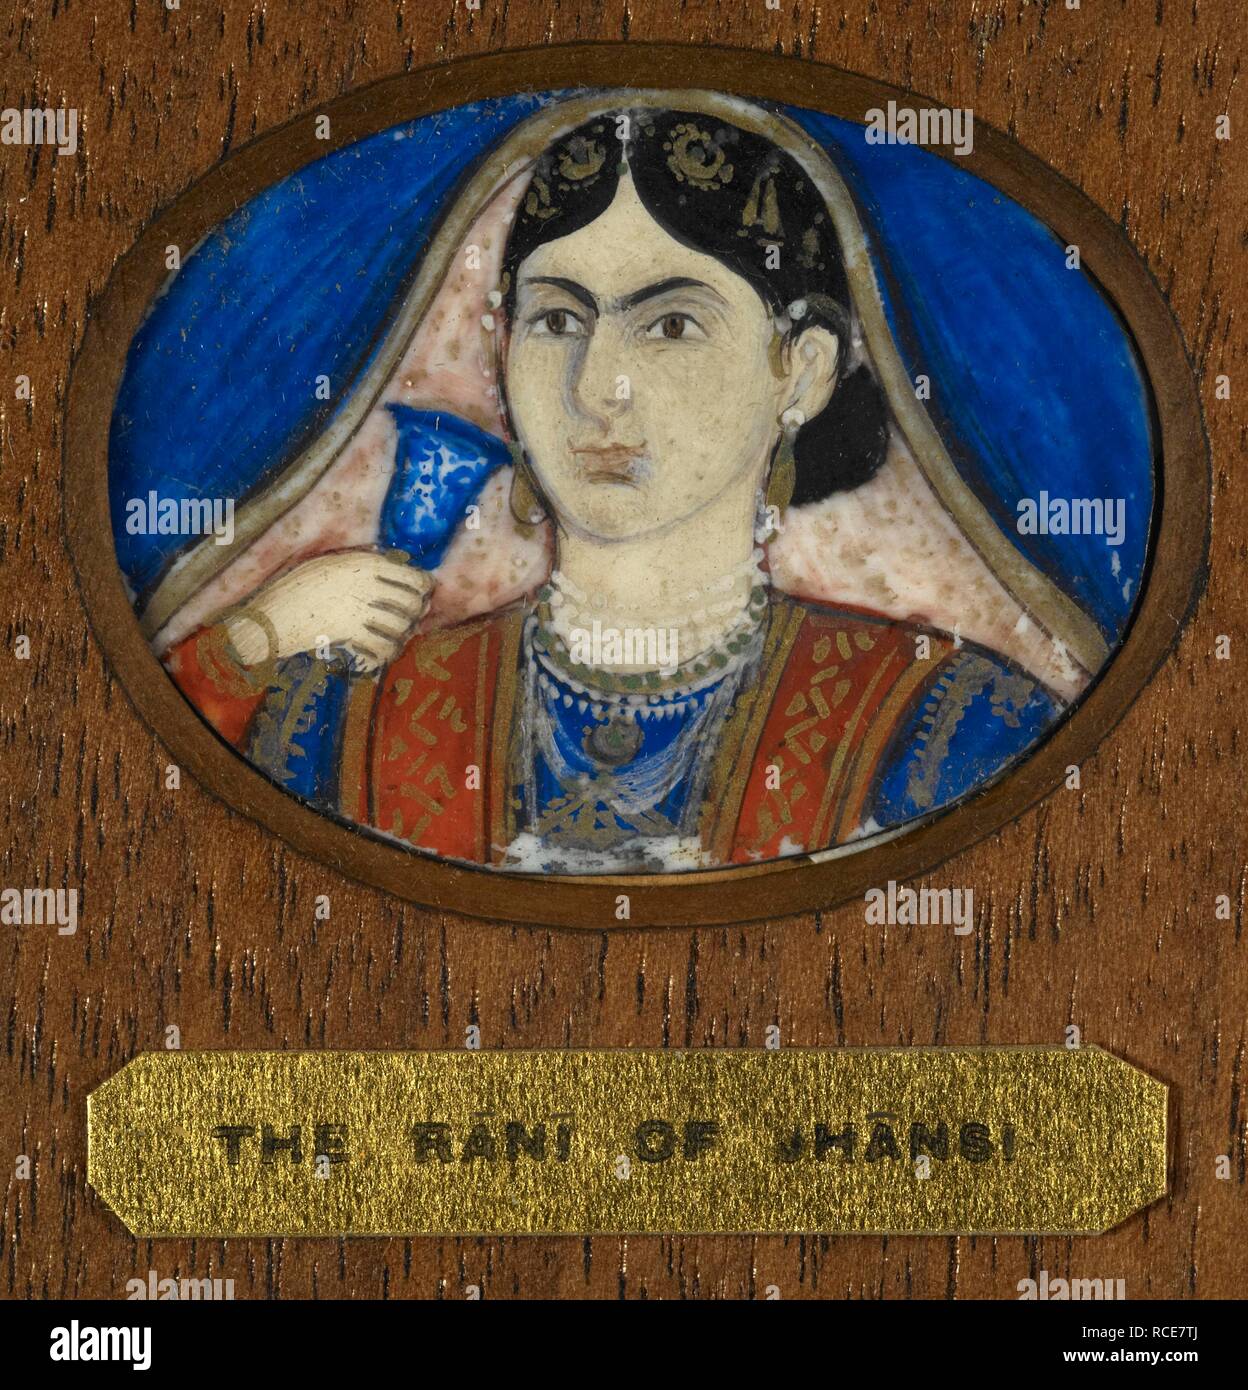 Conventionalised portrait said to be Rani Laksmi Bai of Jhansi (d.1858). c.1860-1870. Watercolour on ivory. Source: Add.Or.2607. Stock Photo